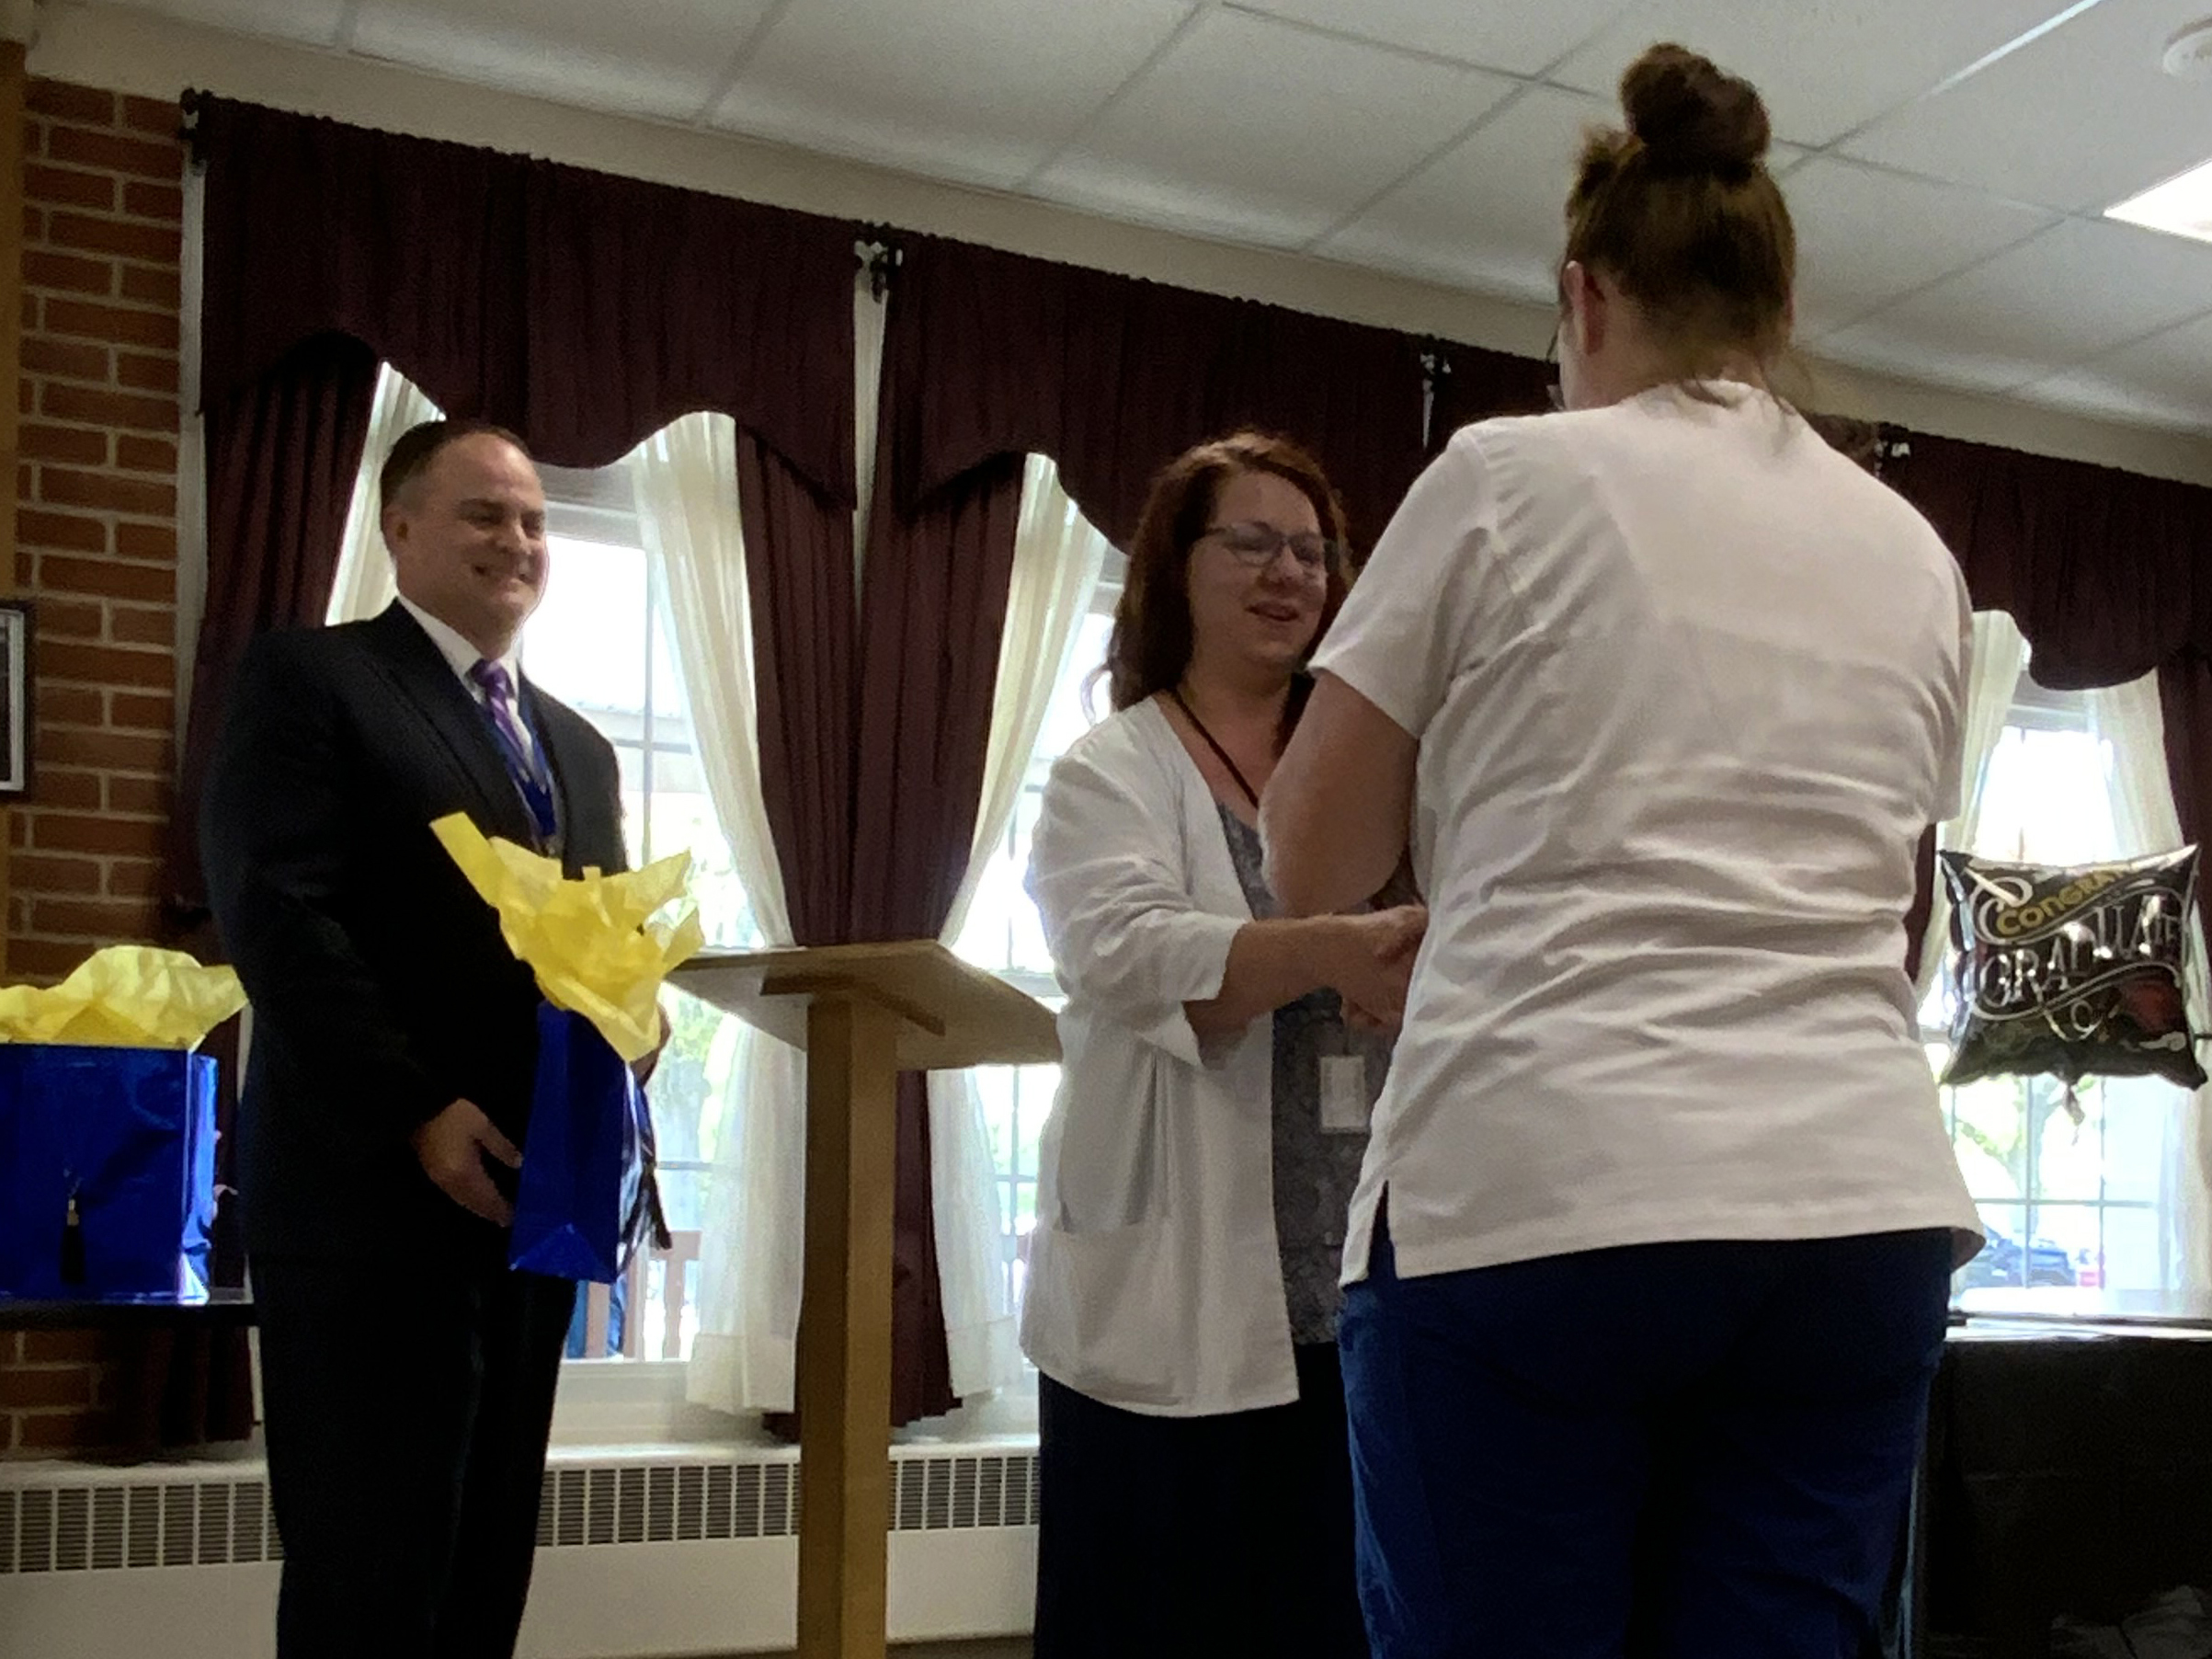 GBCNA4 2 - Transitions Healthcare Gettysburg Graduates Its First Class of Certified Nursing Assistants